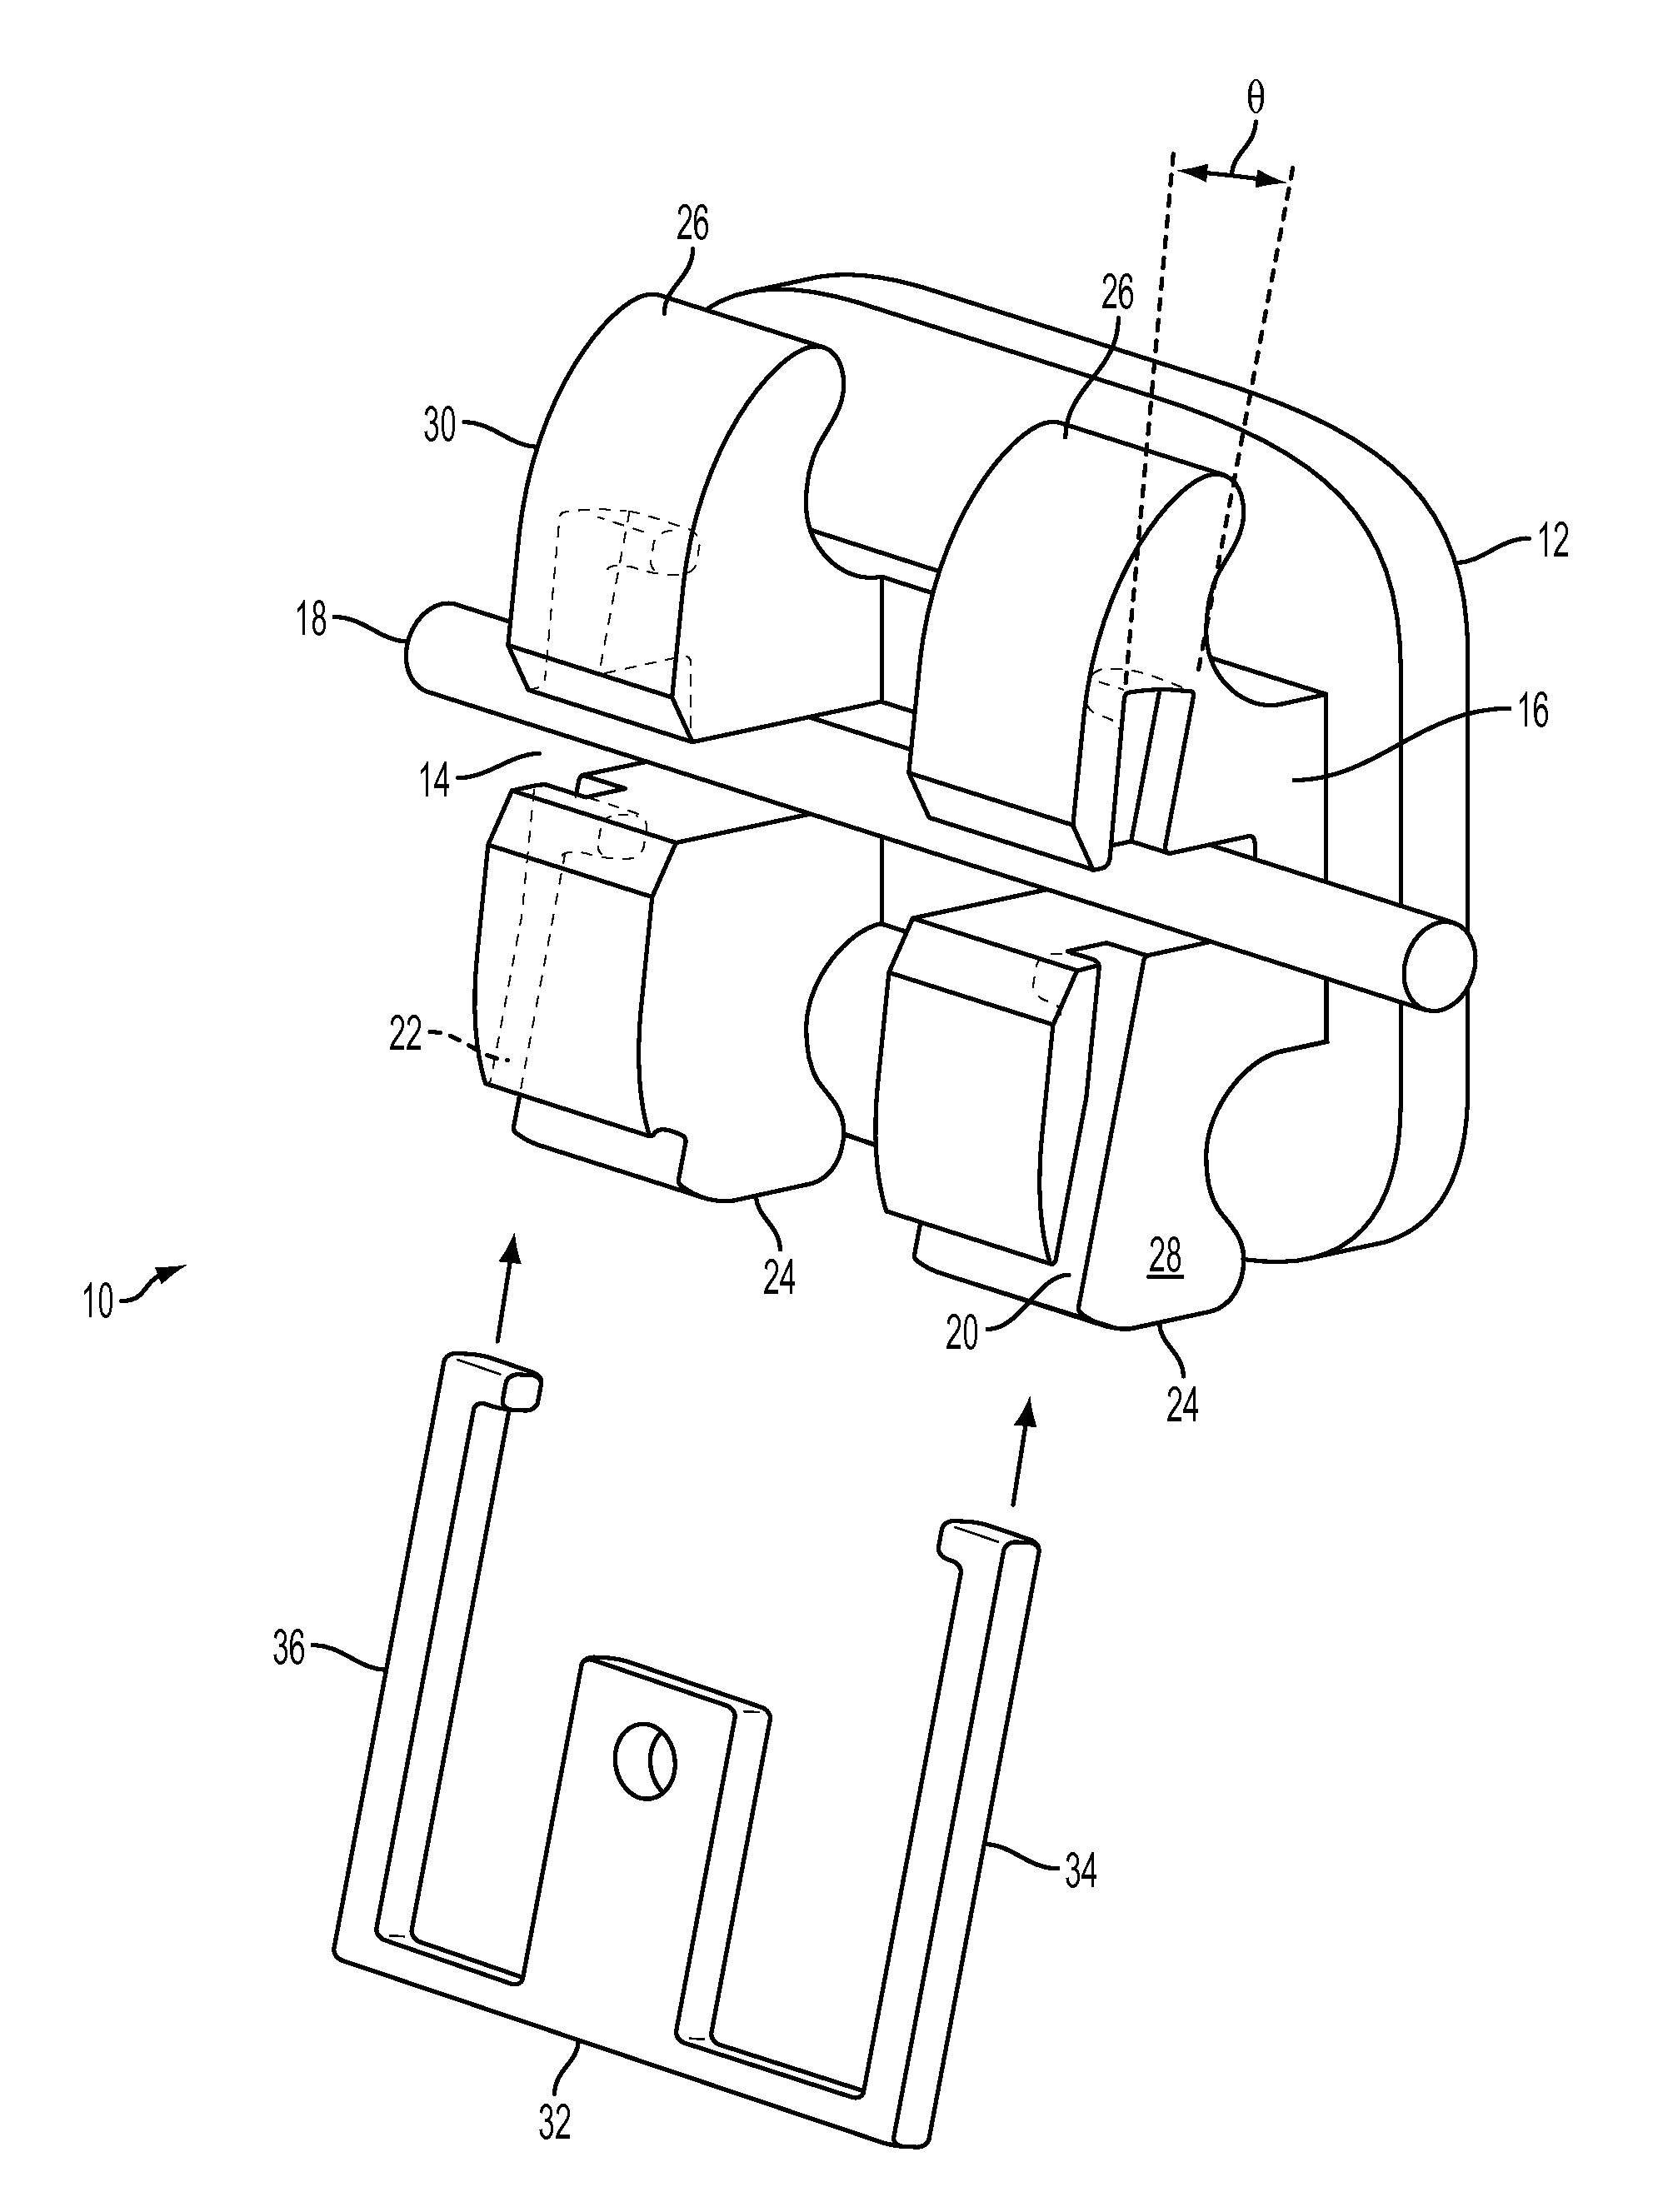 Orthodontic Bracket with Angled, Curved Shutter